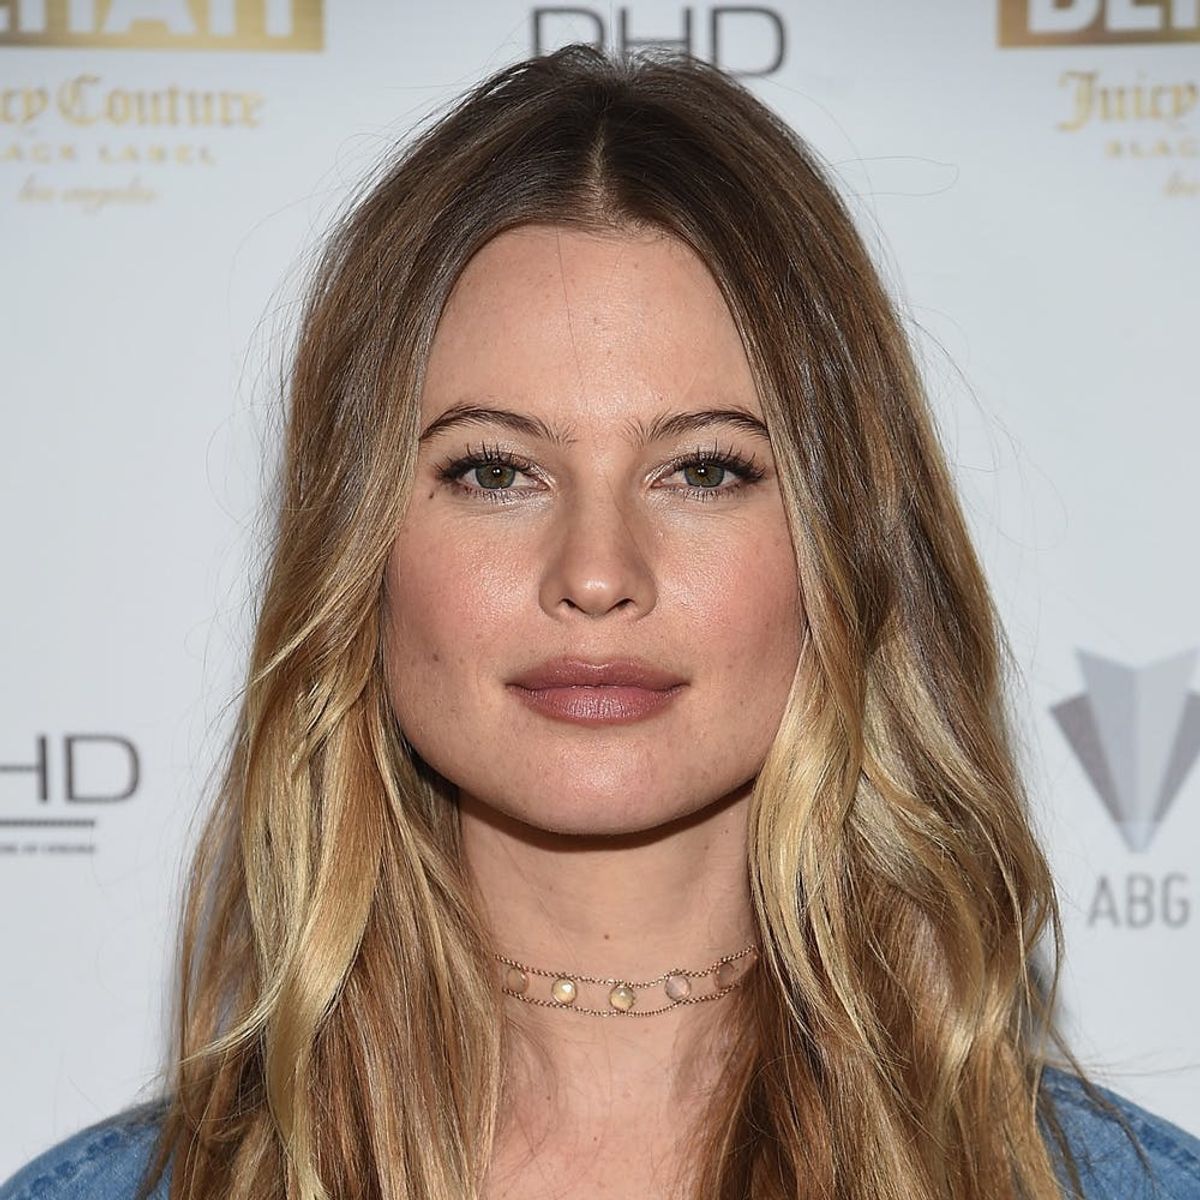 Behati Prinsloo Levine Just Got Her First Haircut in 3 Years